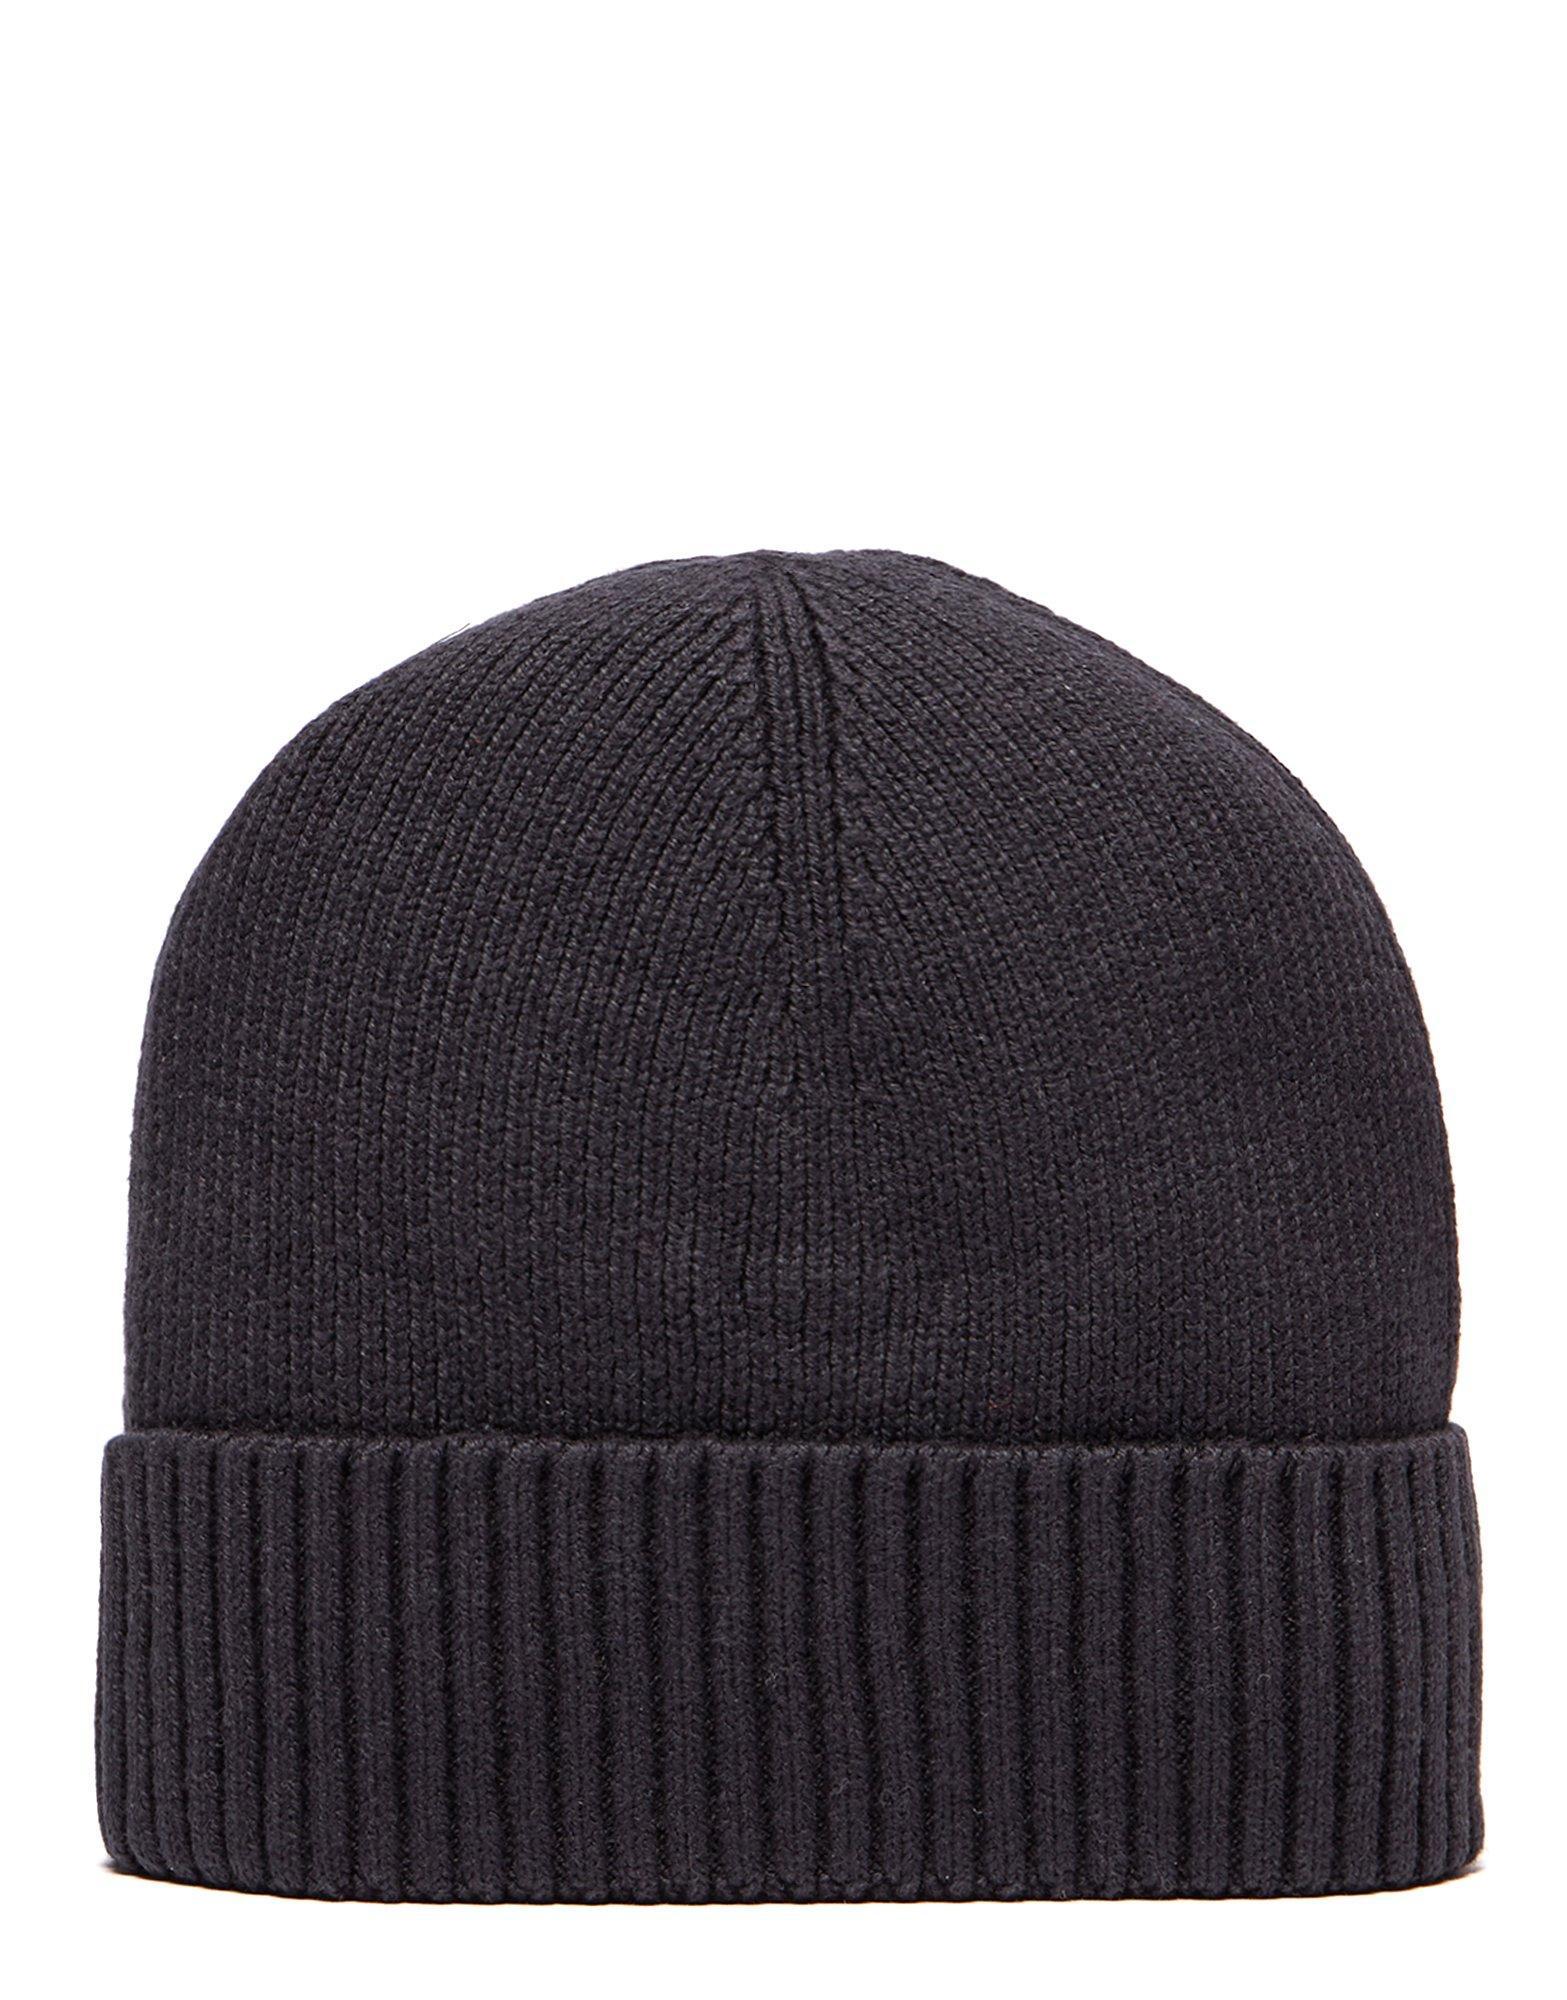 Tommy Hilfiger Small Flag Beanie in Black for Men - Lyst